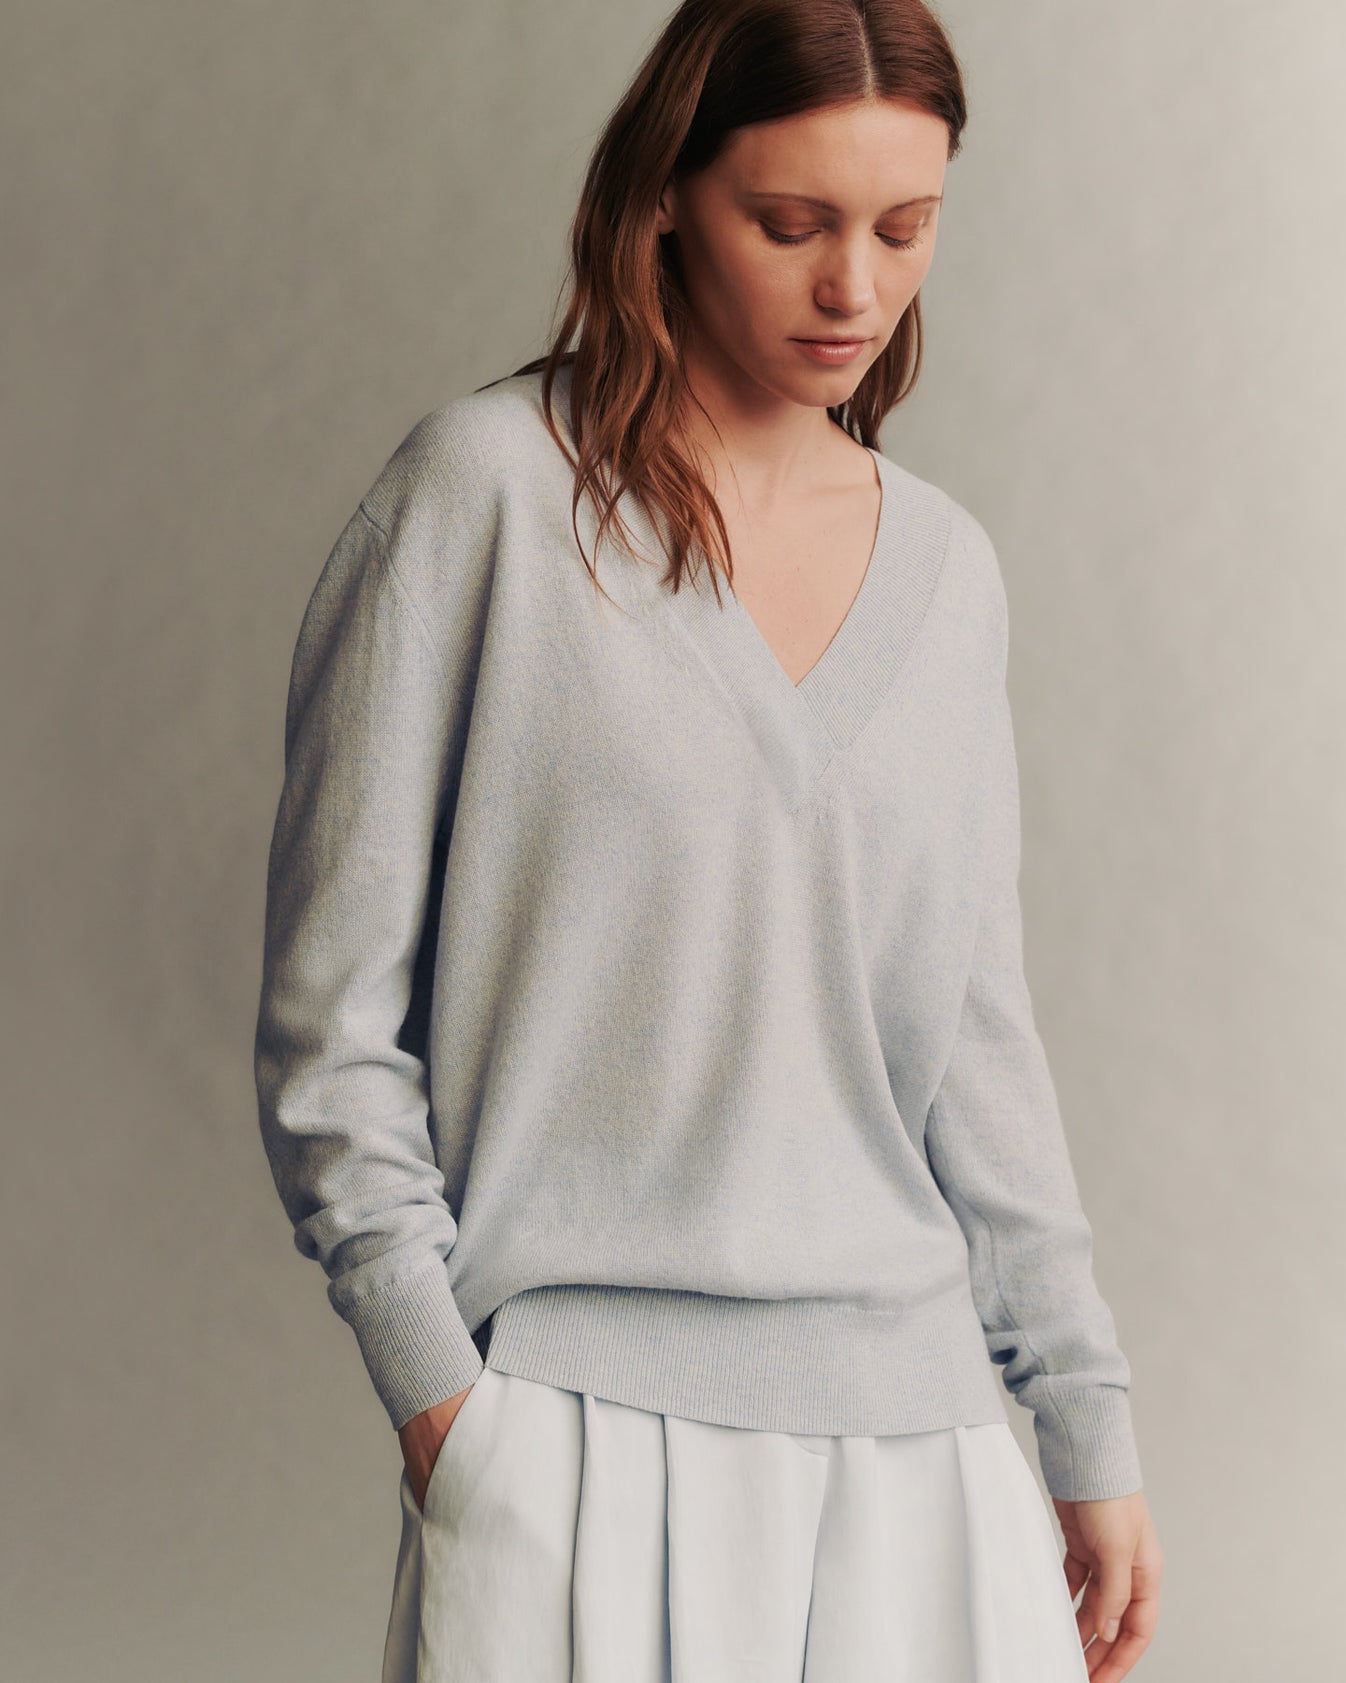 TWP Ancient water Deep V Sweater in Cashmere view 2